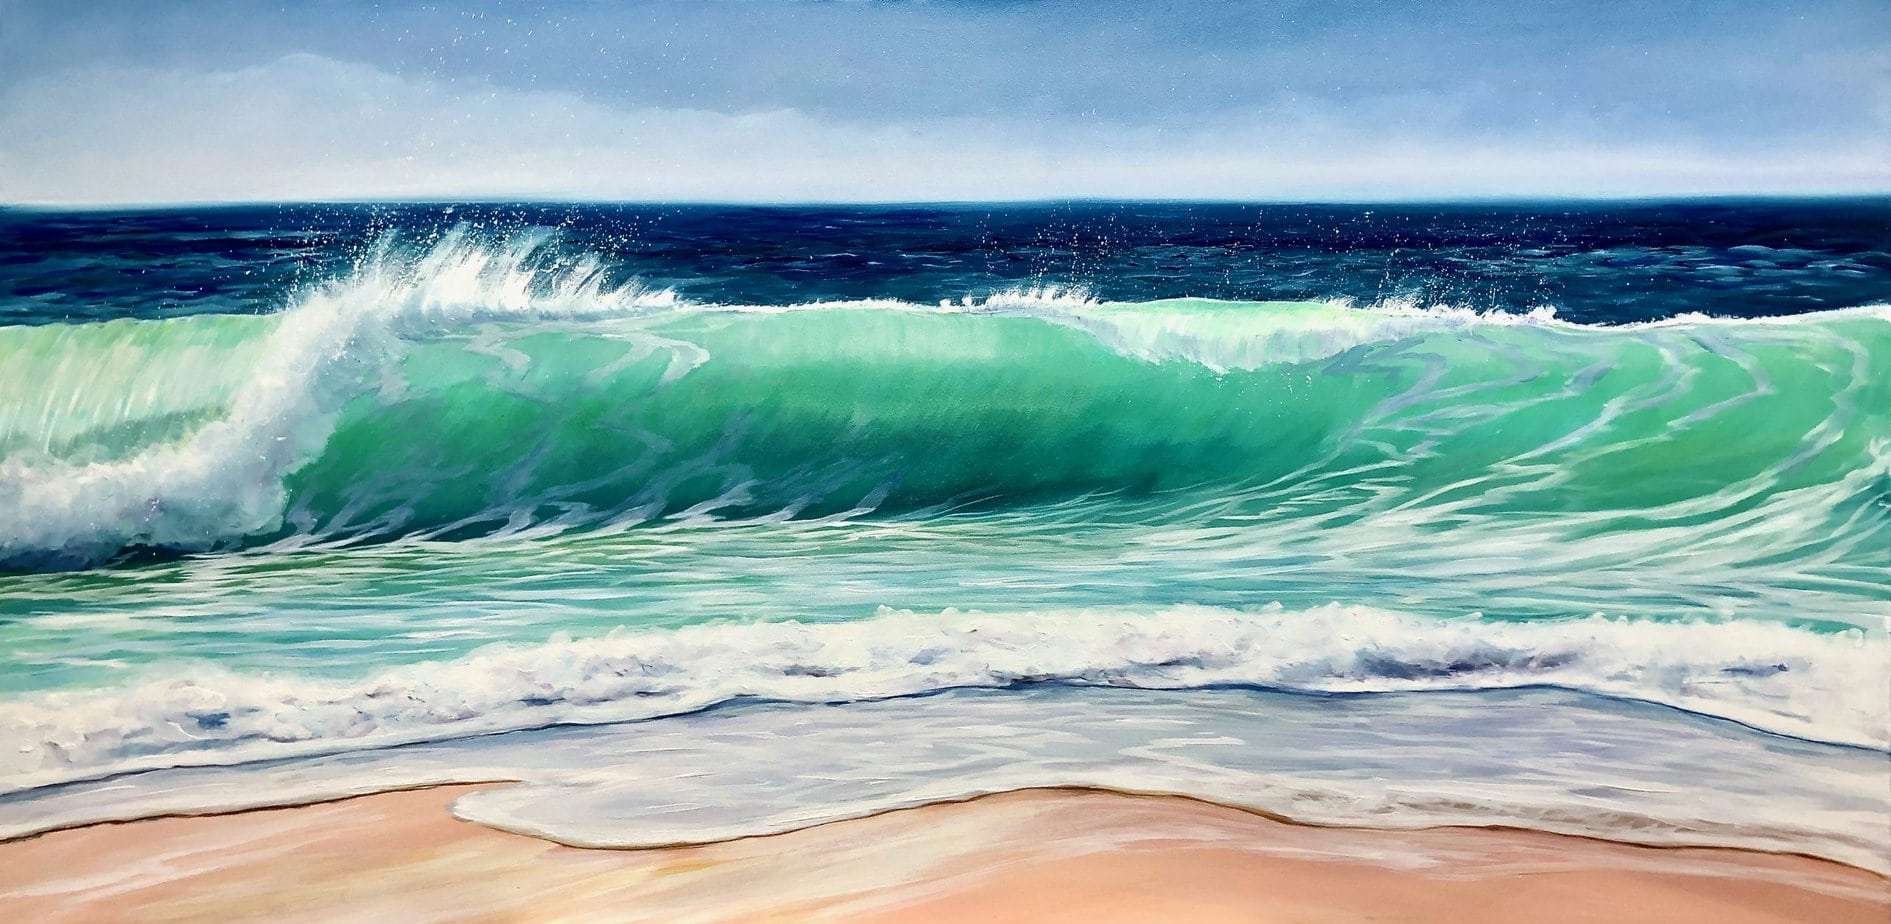 Sea Green Wave original seascape wave oil painting on canvas. Framed and ready to hang. 125 cm x 64 cm